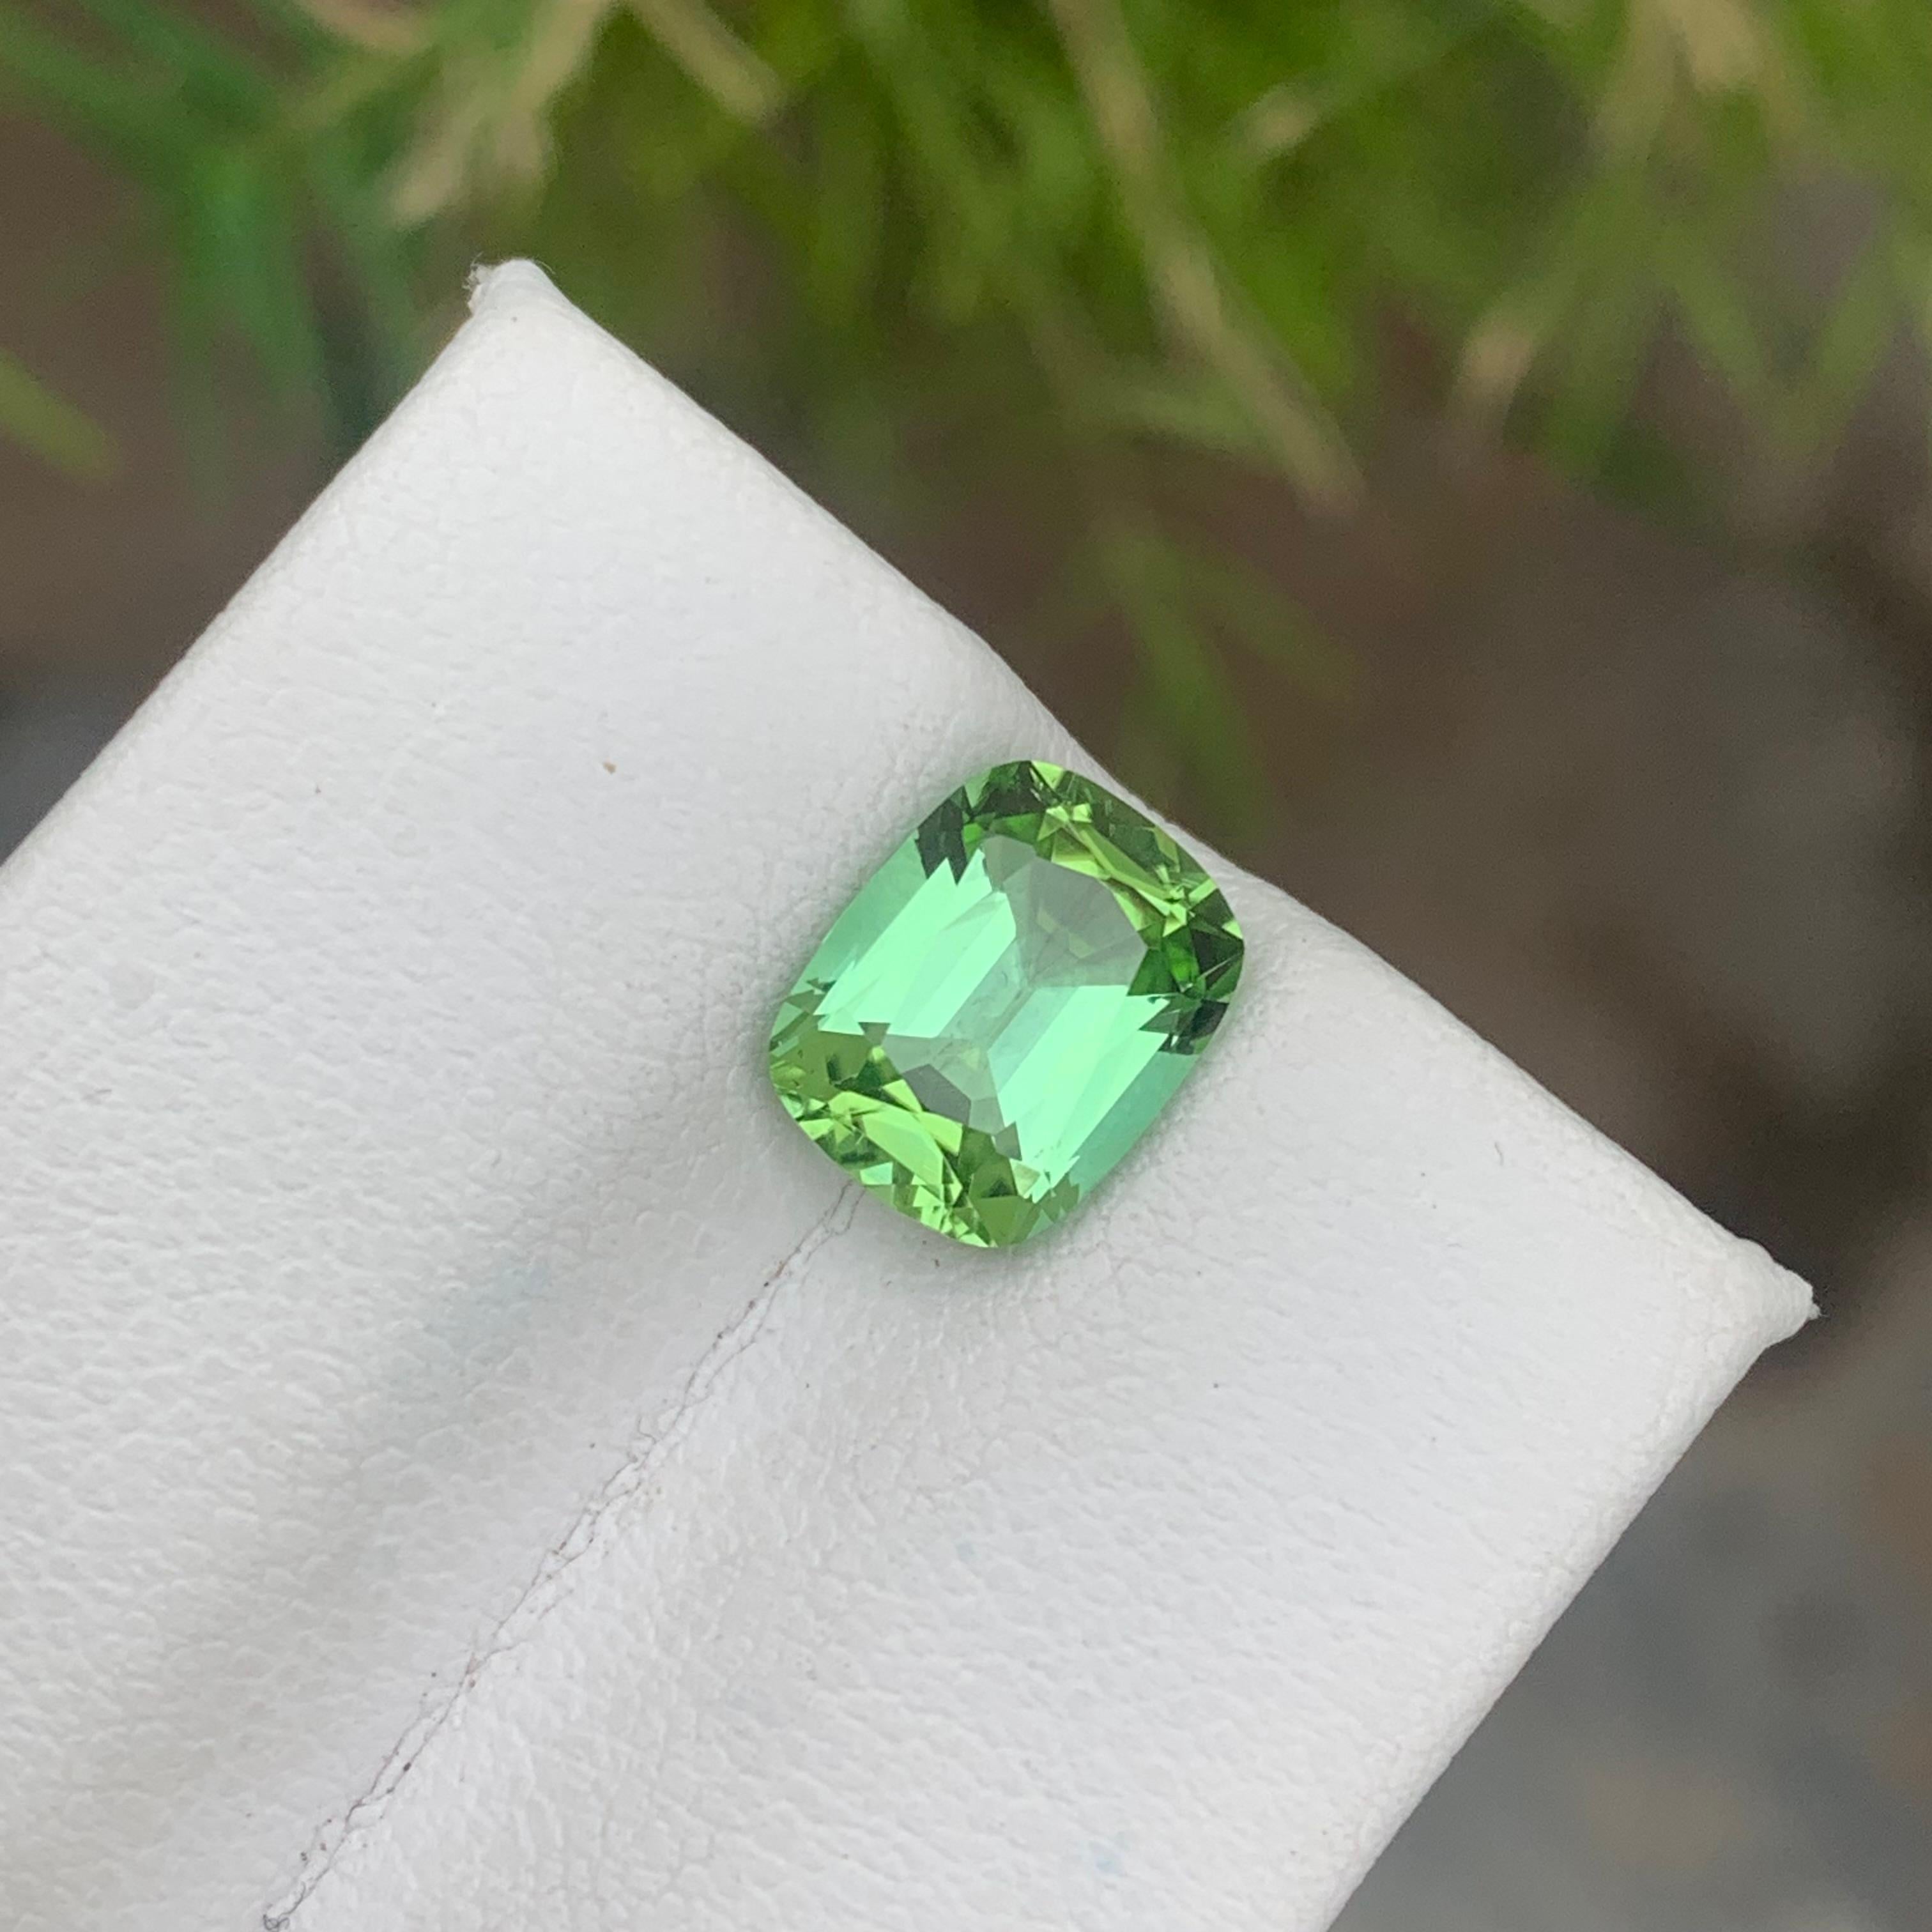 Stunning 2.65 Carat Natural Loose Tourmaline Ring Cushion Cut From Afghanistan For Sale 6